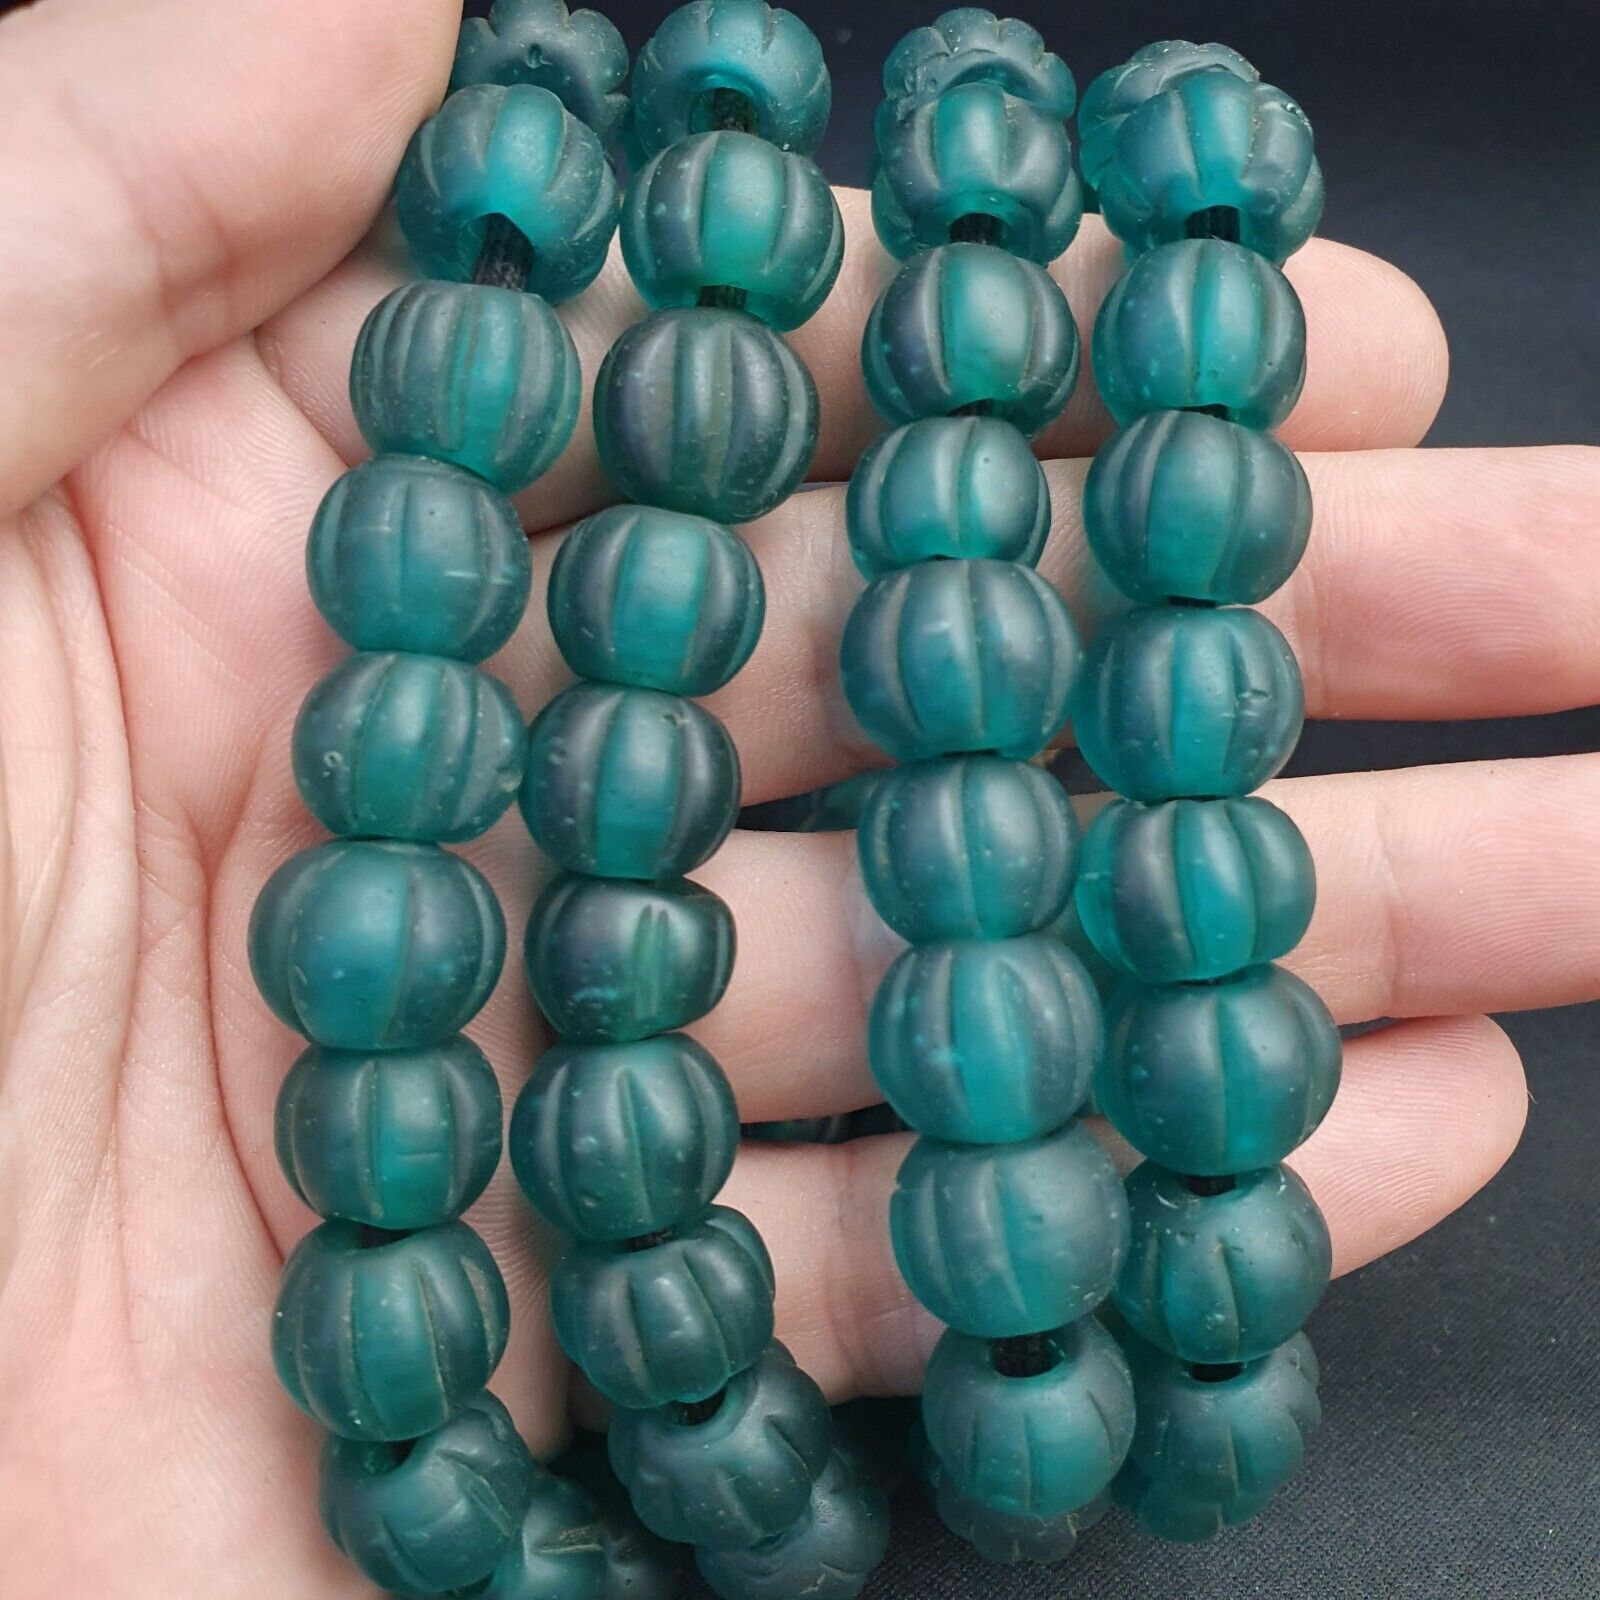 AA BEAUTIFUL OLD AFRICAN Green GLASS ANTIQUE BEADS 13-14MM